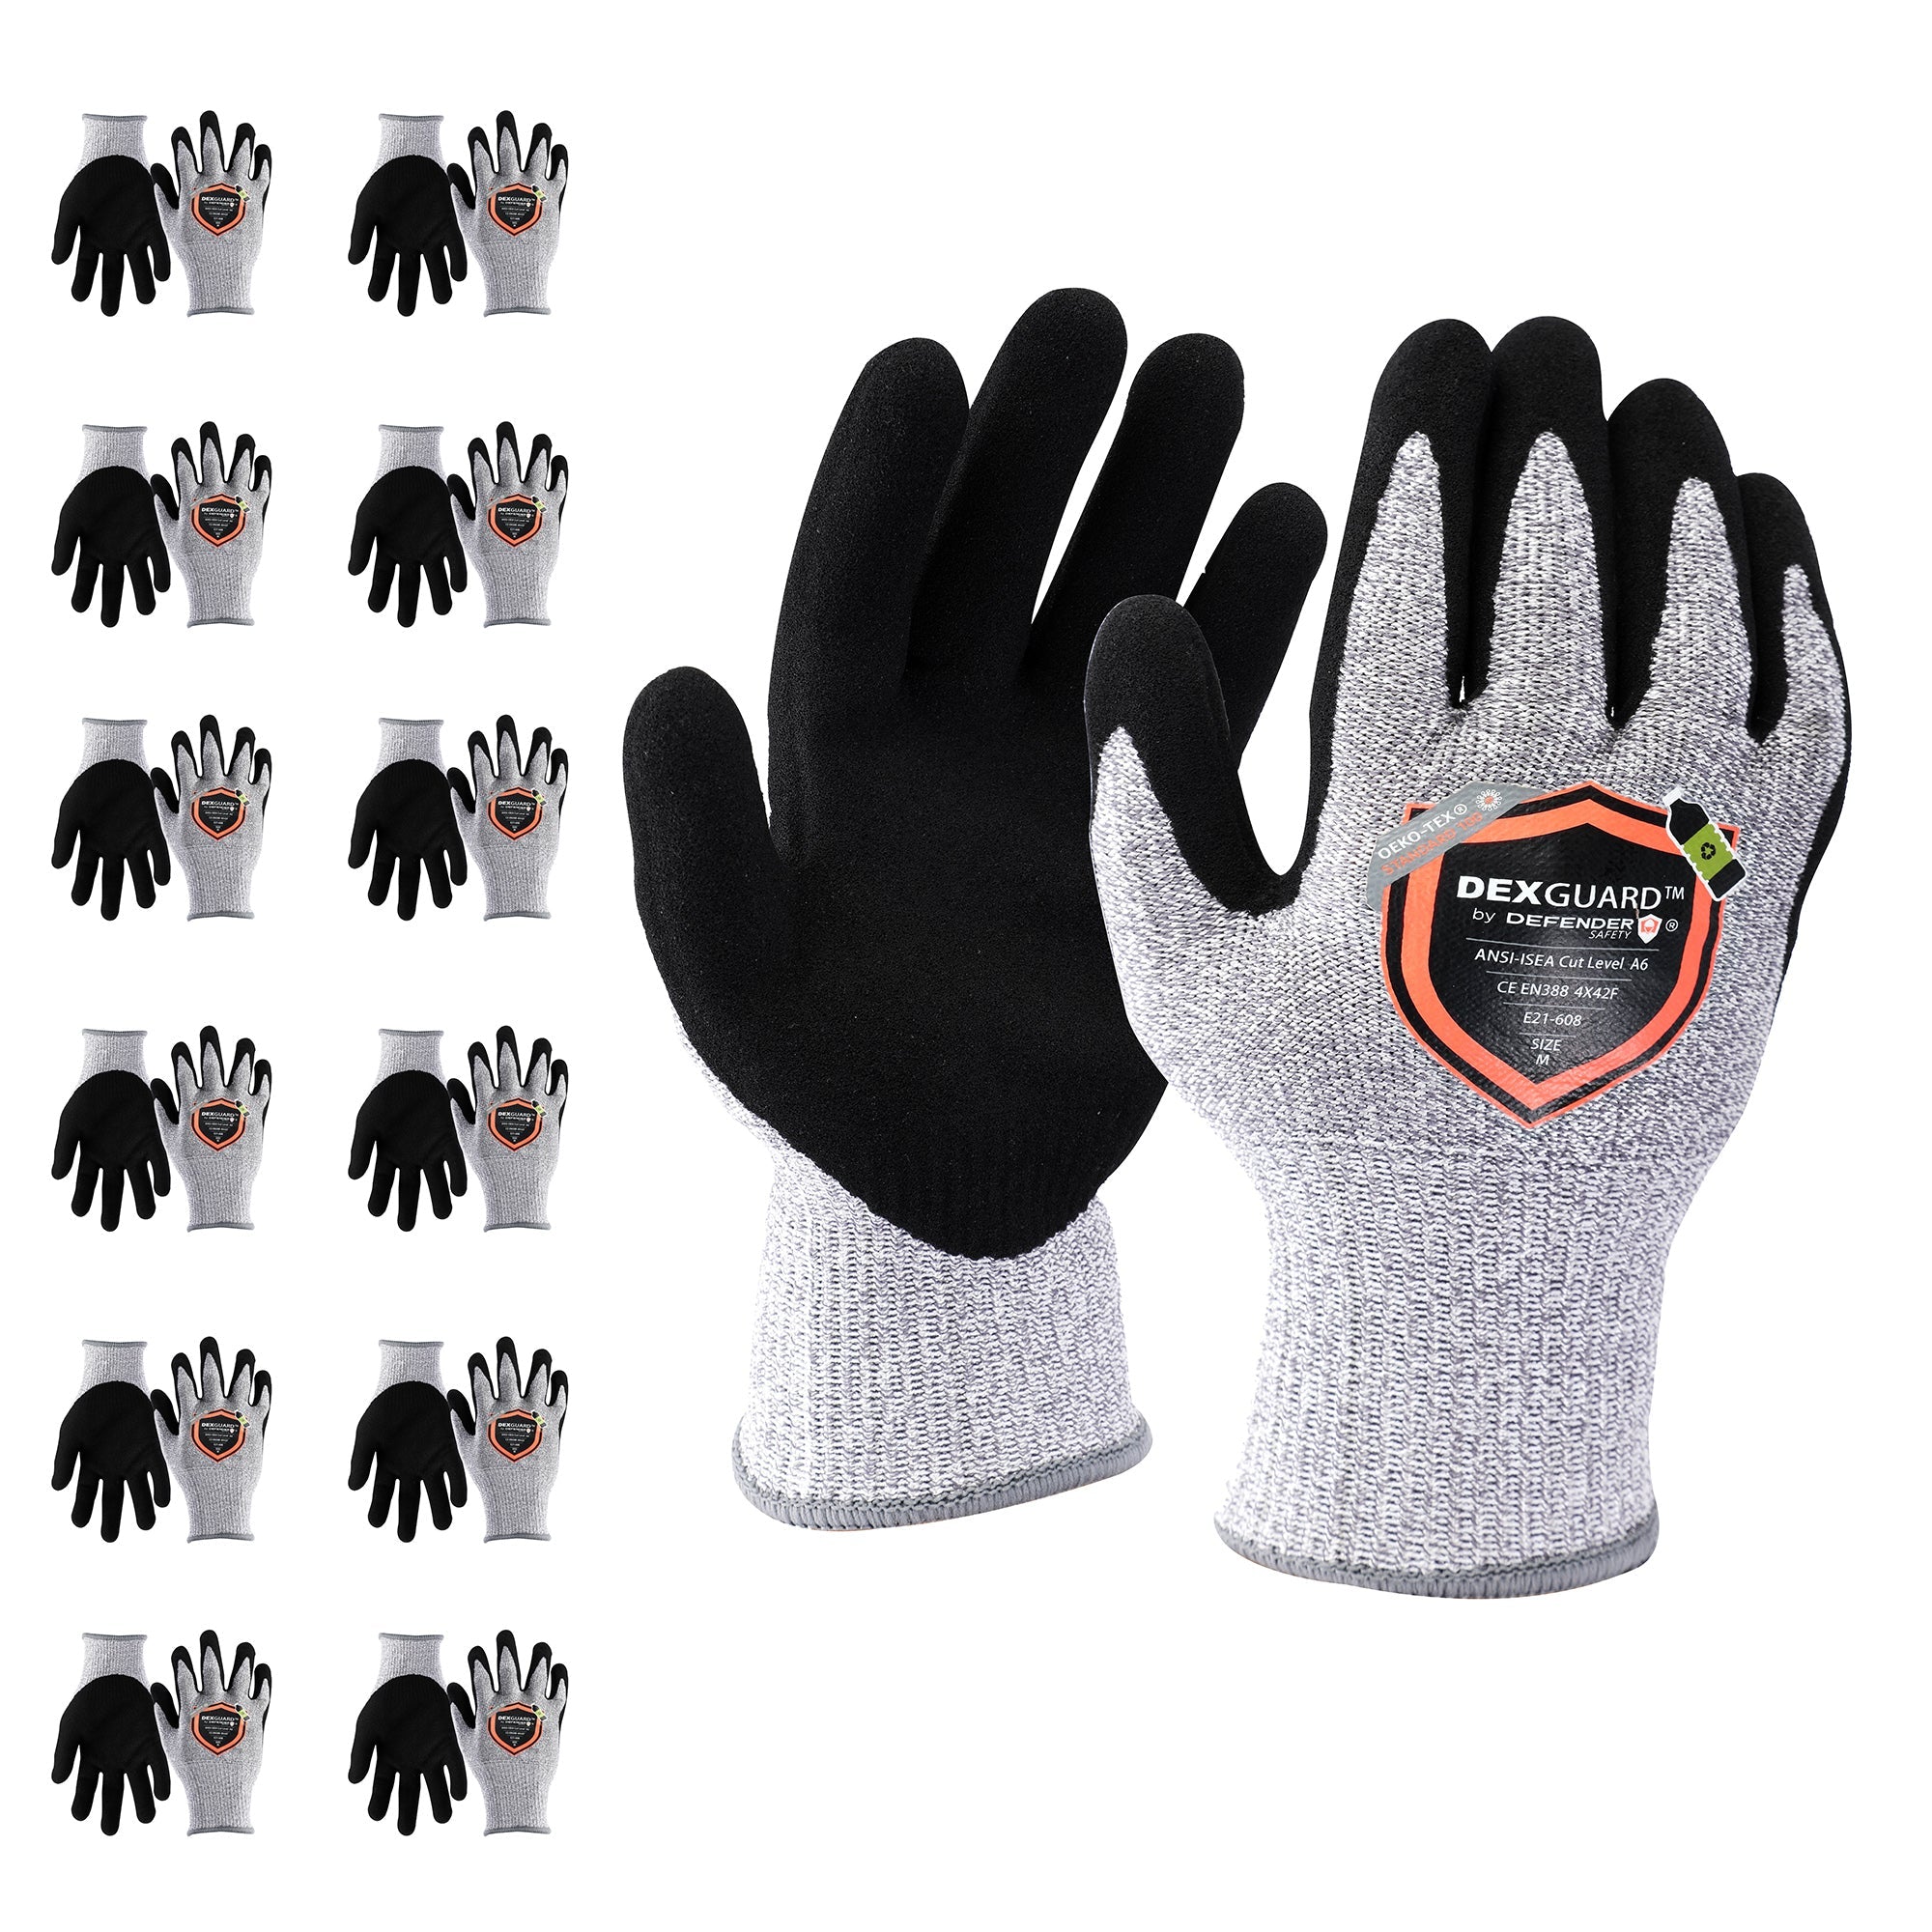 DEXGUARD™ A6 Cut Gloves, Level 4 Abrasion Resistant, Textured Nitrile Coating, Touch Screen Compatible - Defender Safety